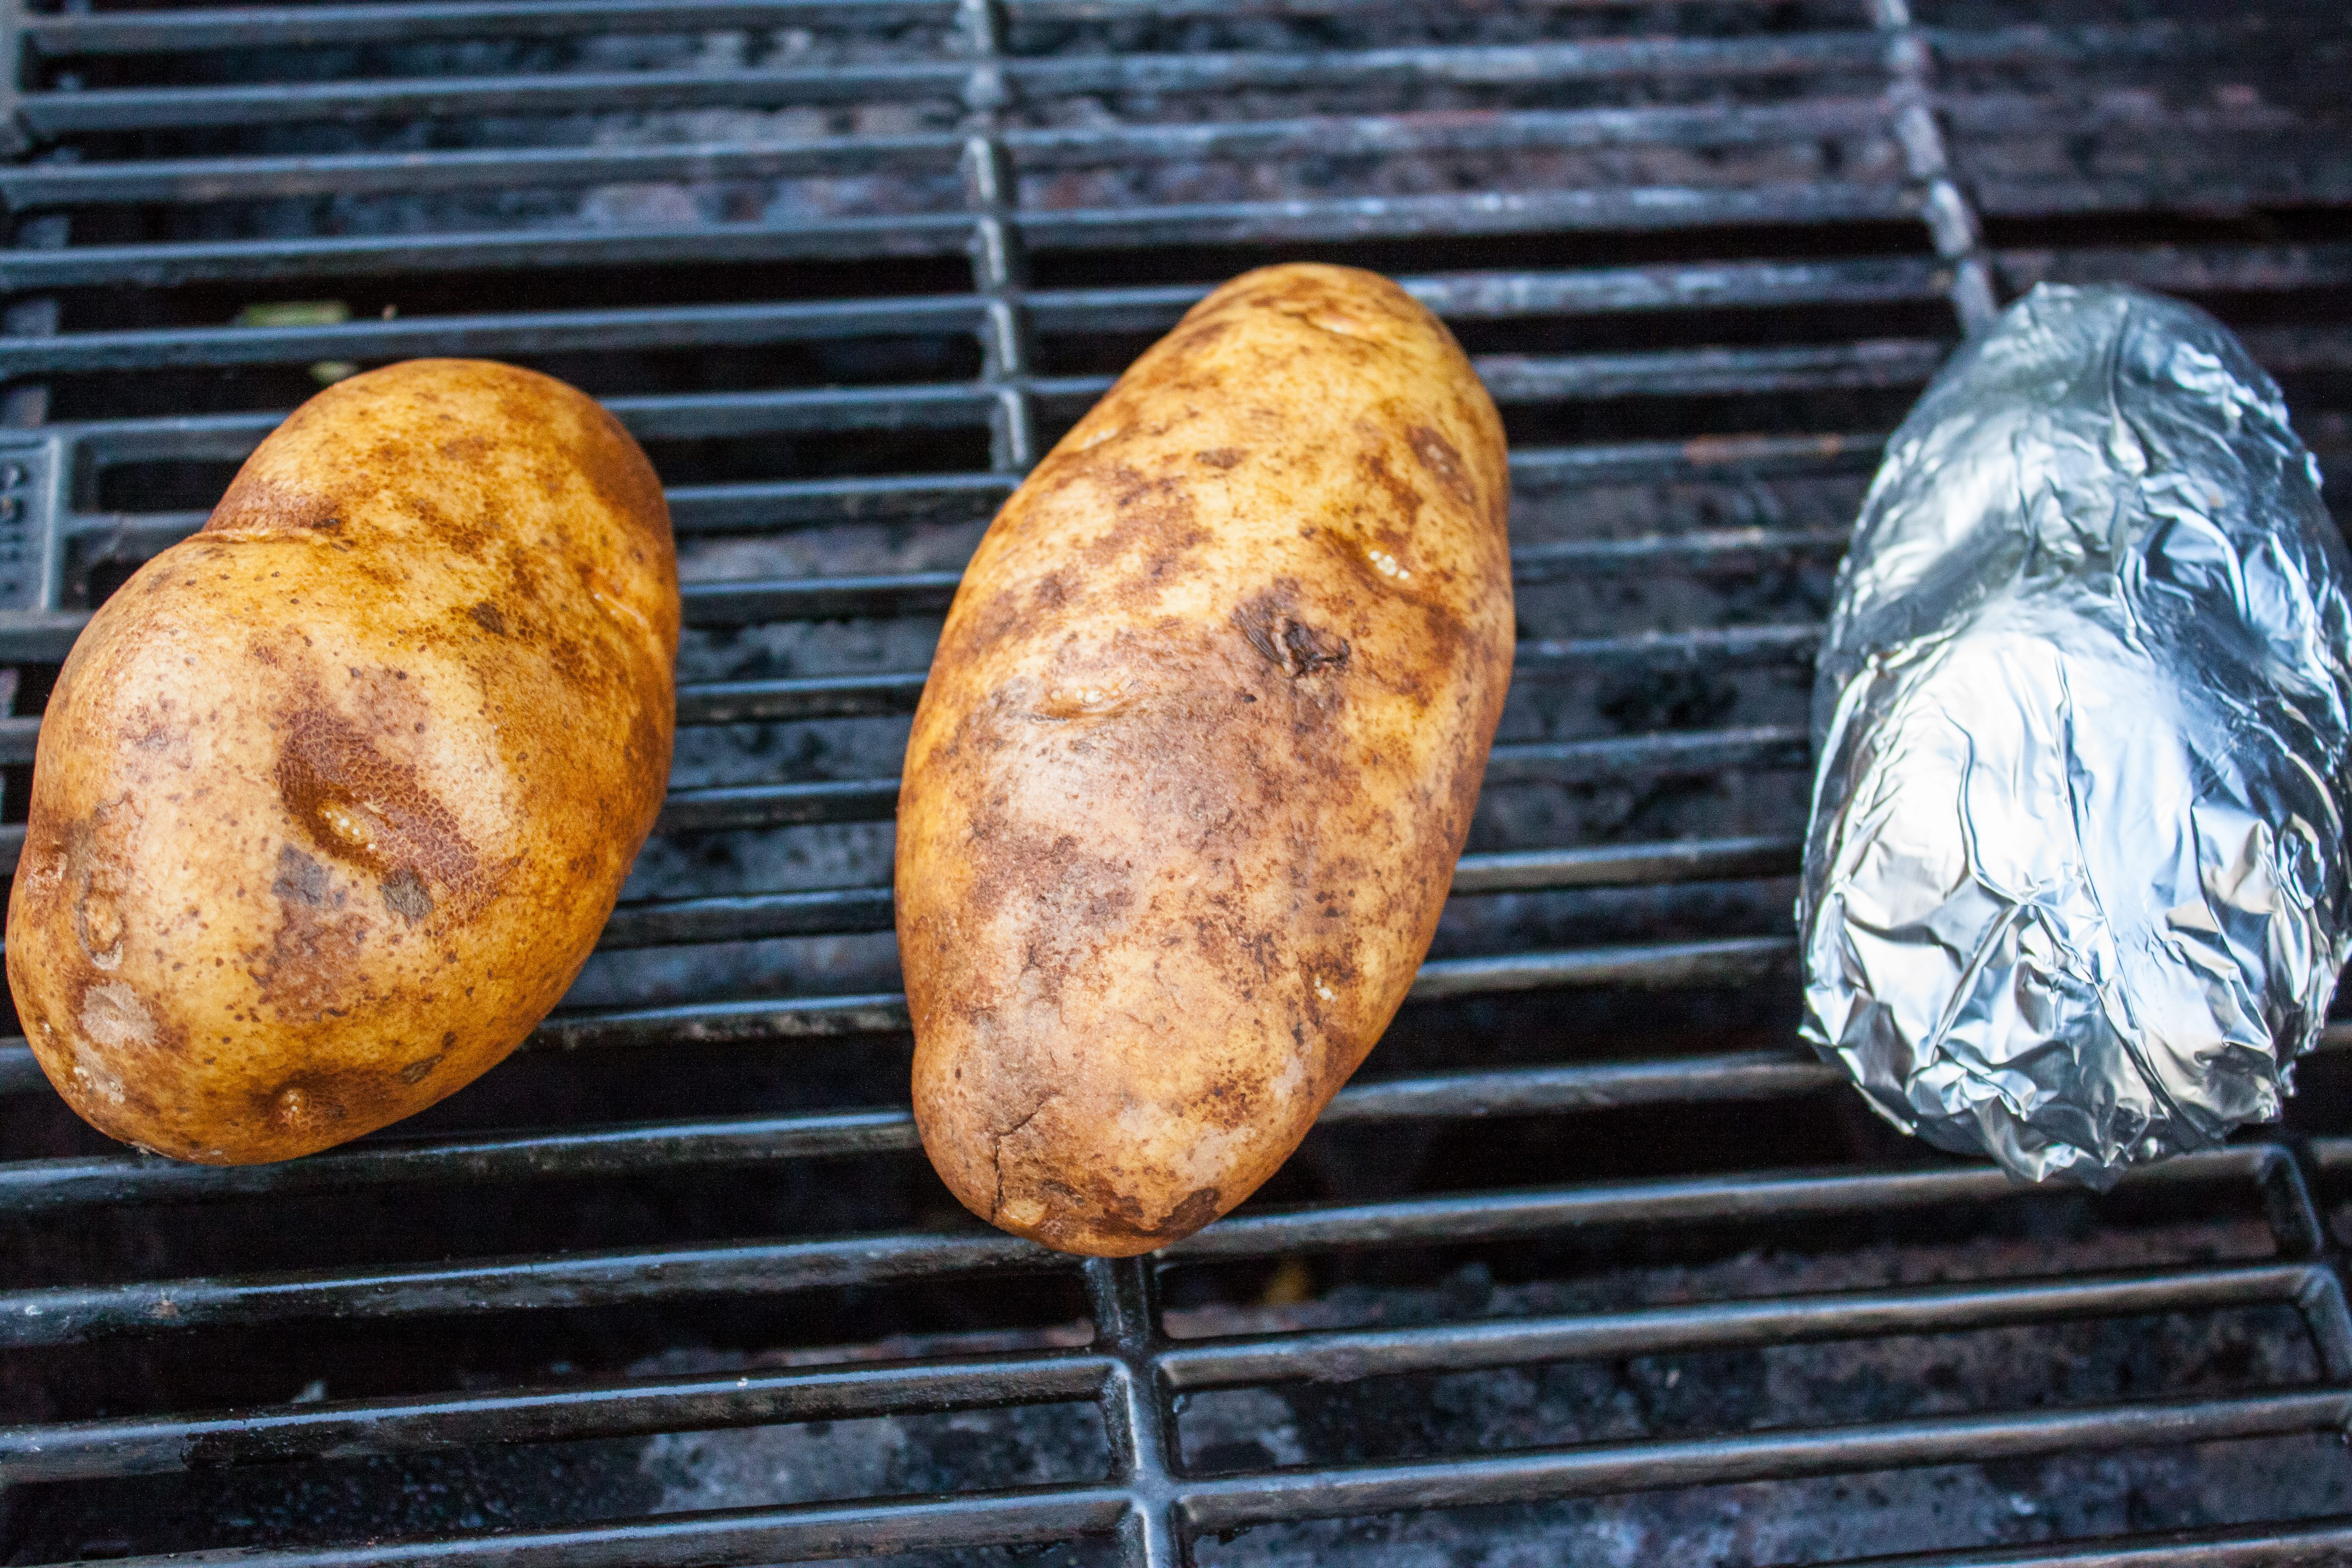 Baked Potato On The Grill
 How to Make Baked Potatoes on the Grill